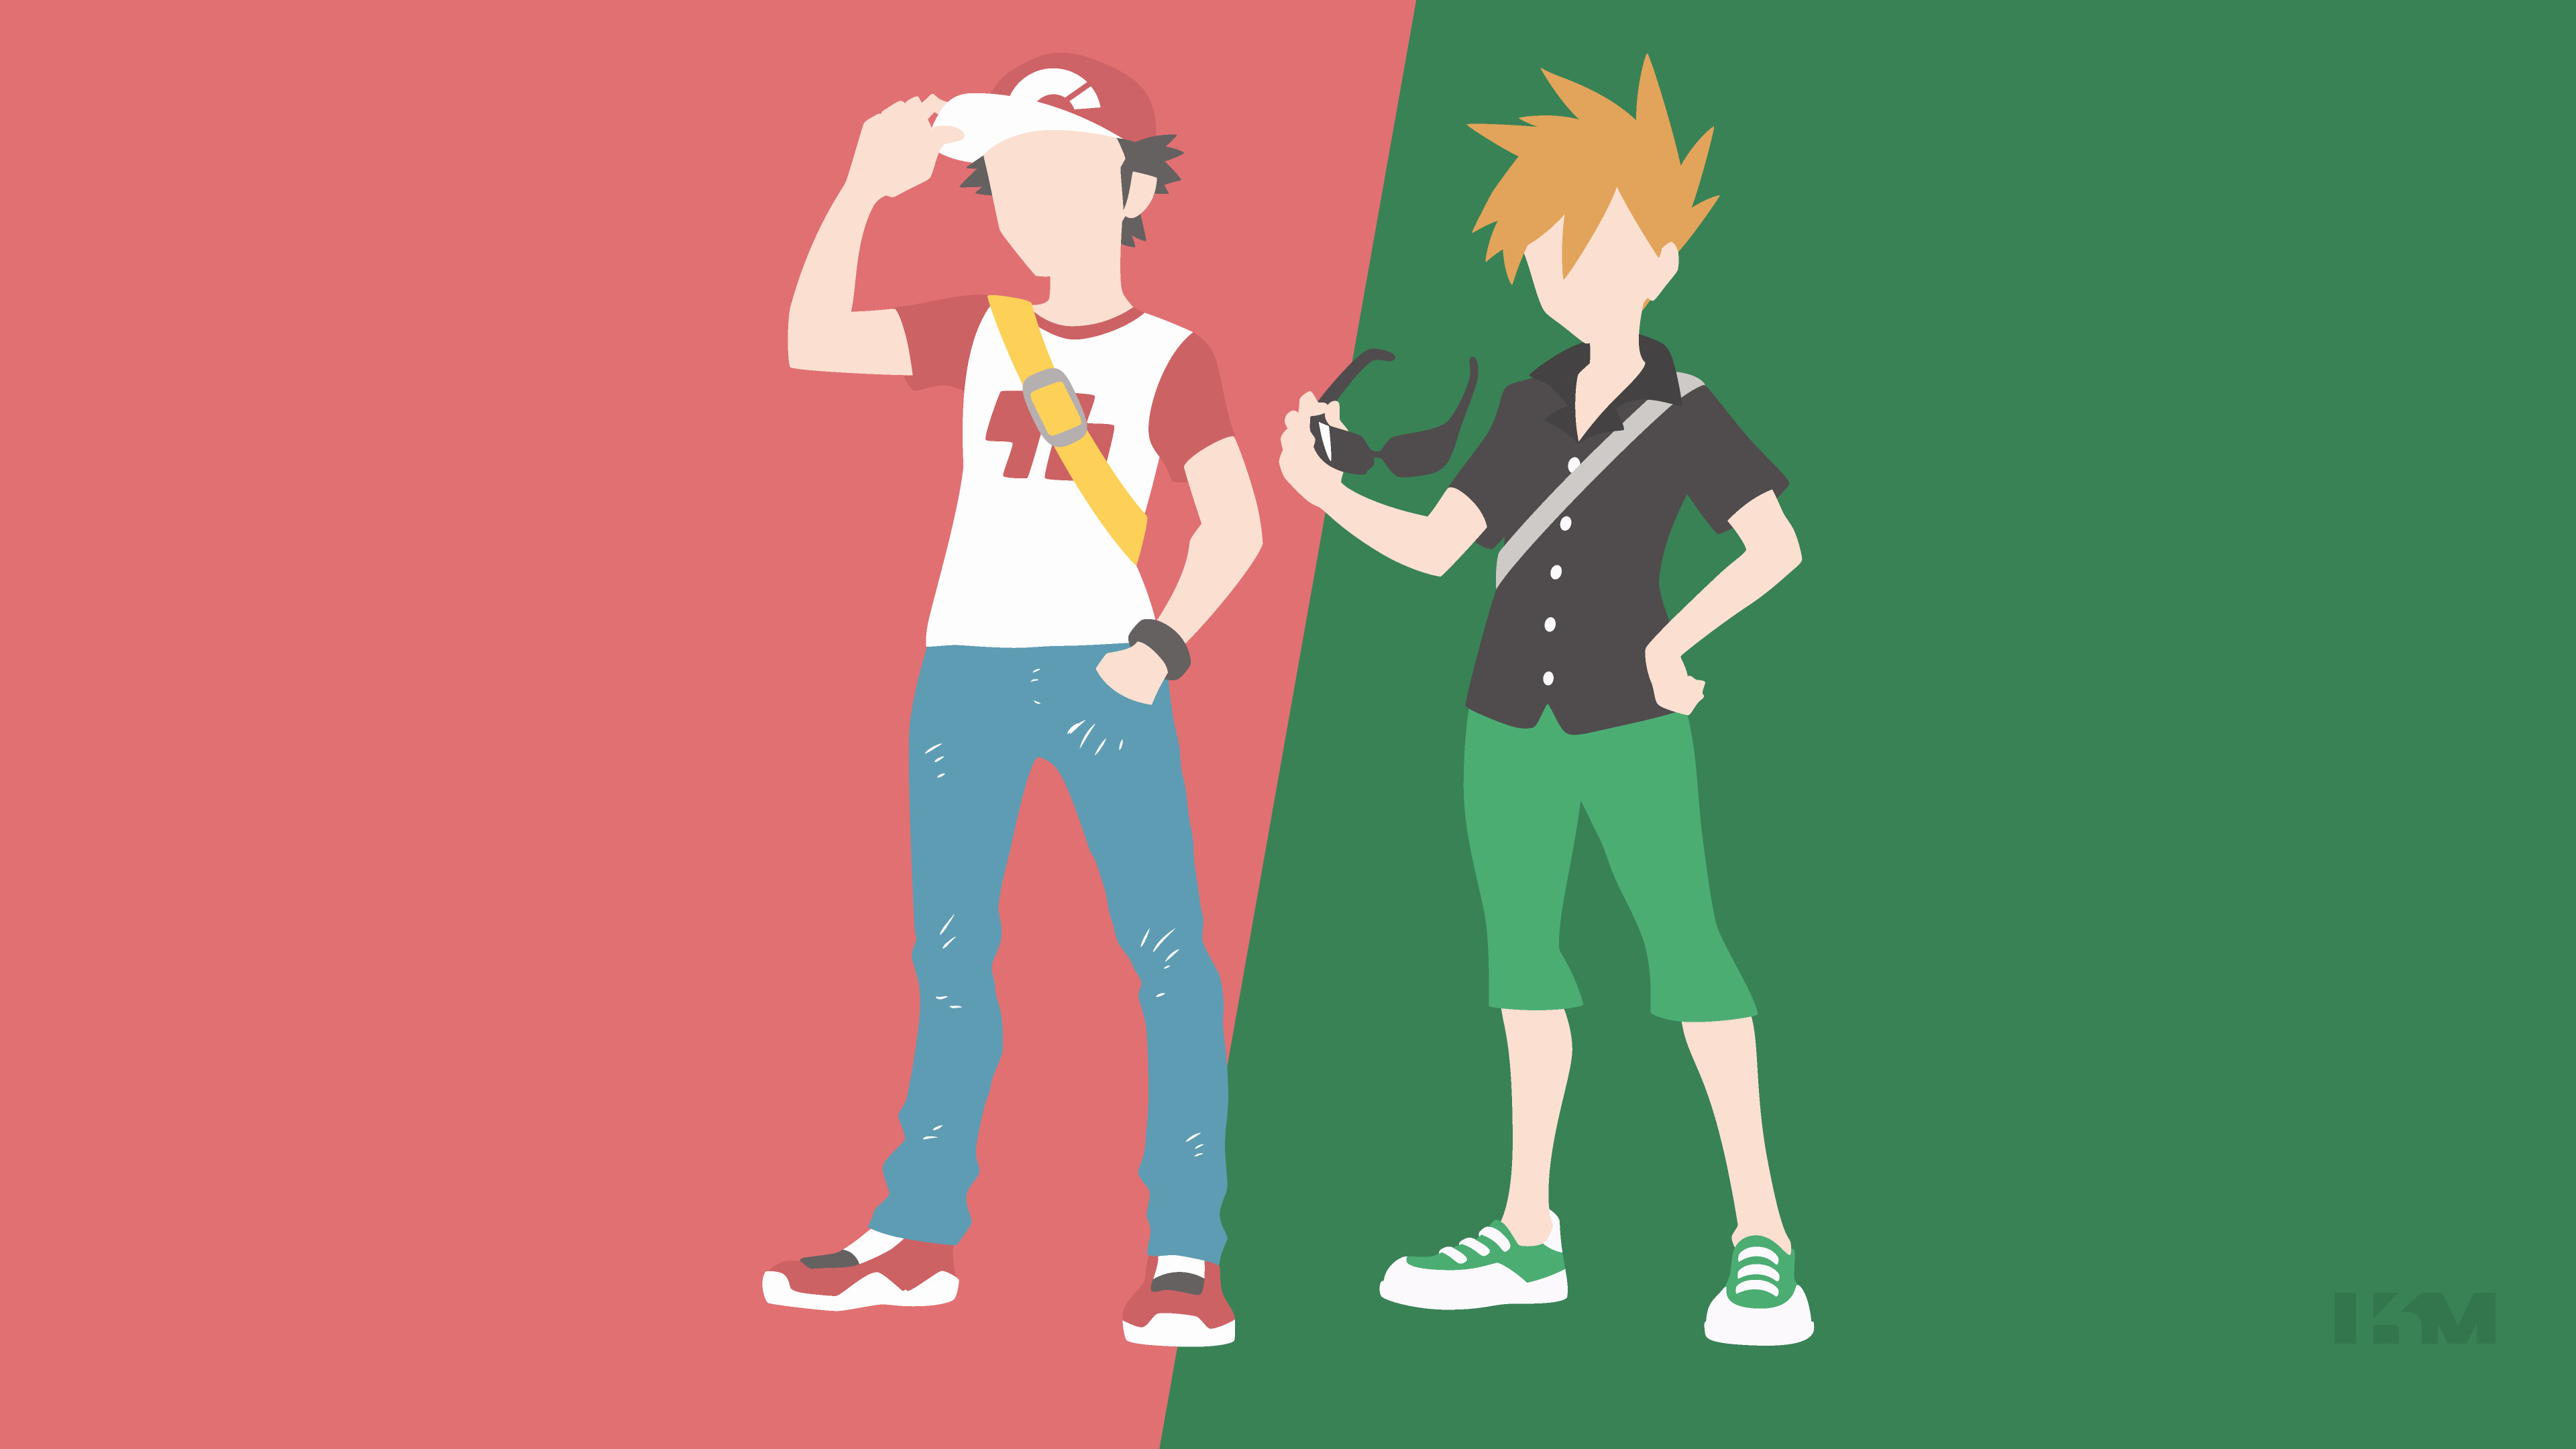 3840x2160 ... Pokemon Sun/Moon - Trainer Red and Blue by Krukmeister